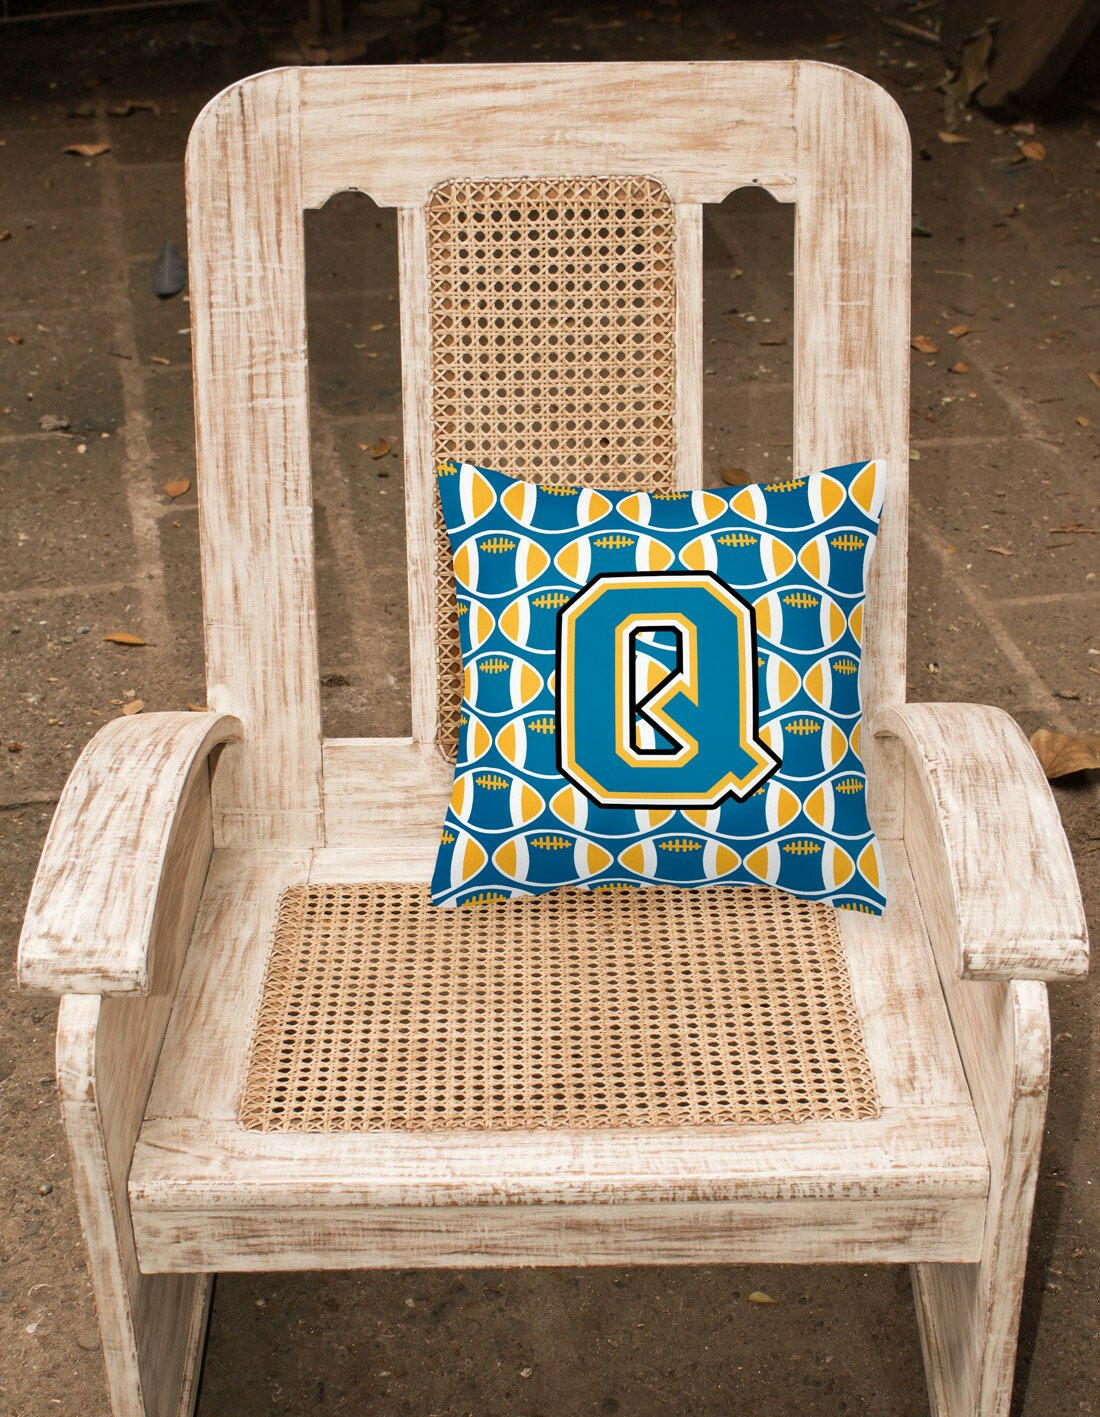 Letter Q Football Blue and Gold Fabric Decorative Pillow CJ1077-QPW1414 by Caroline's Treasures